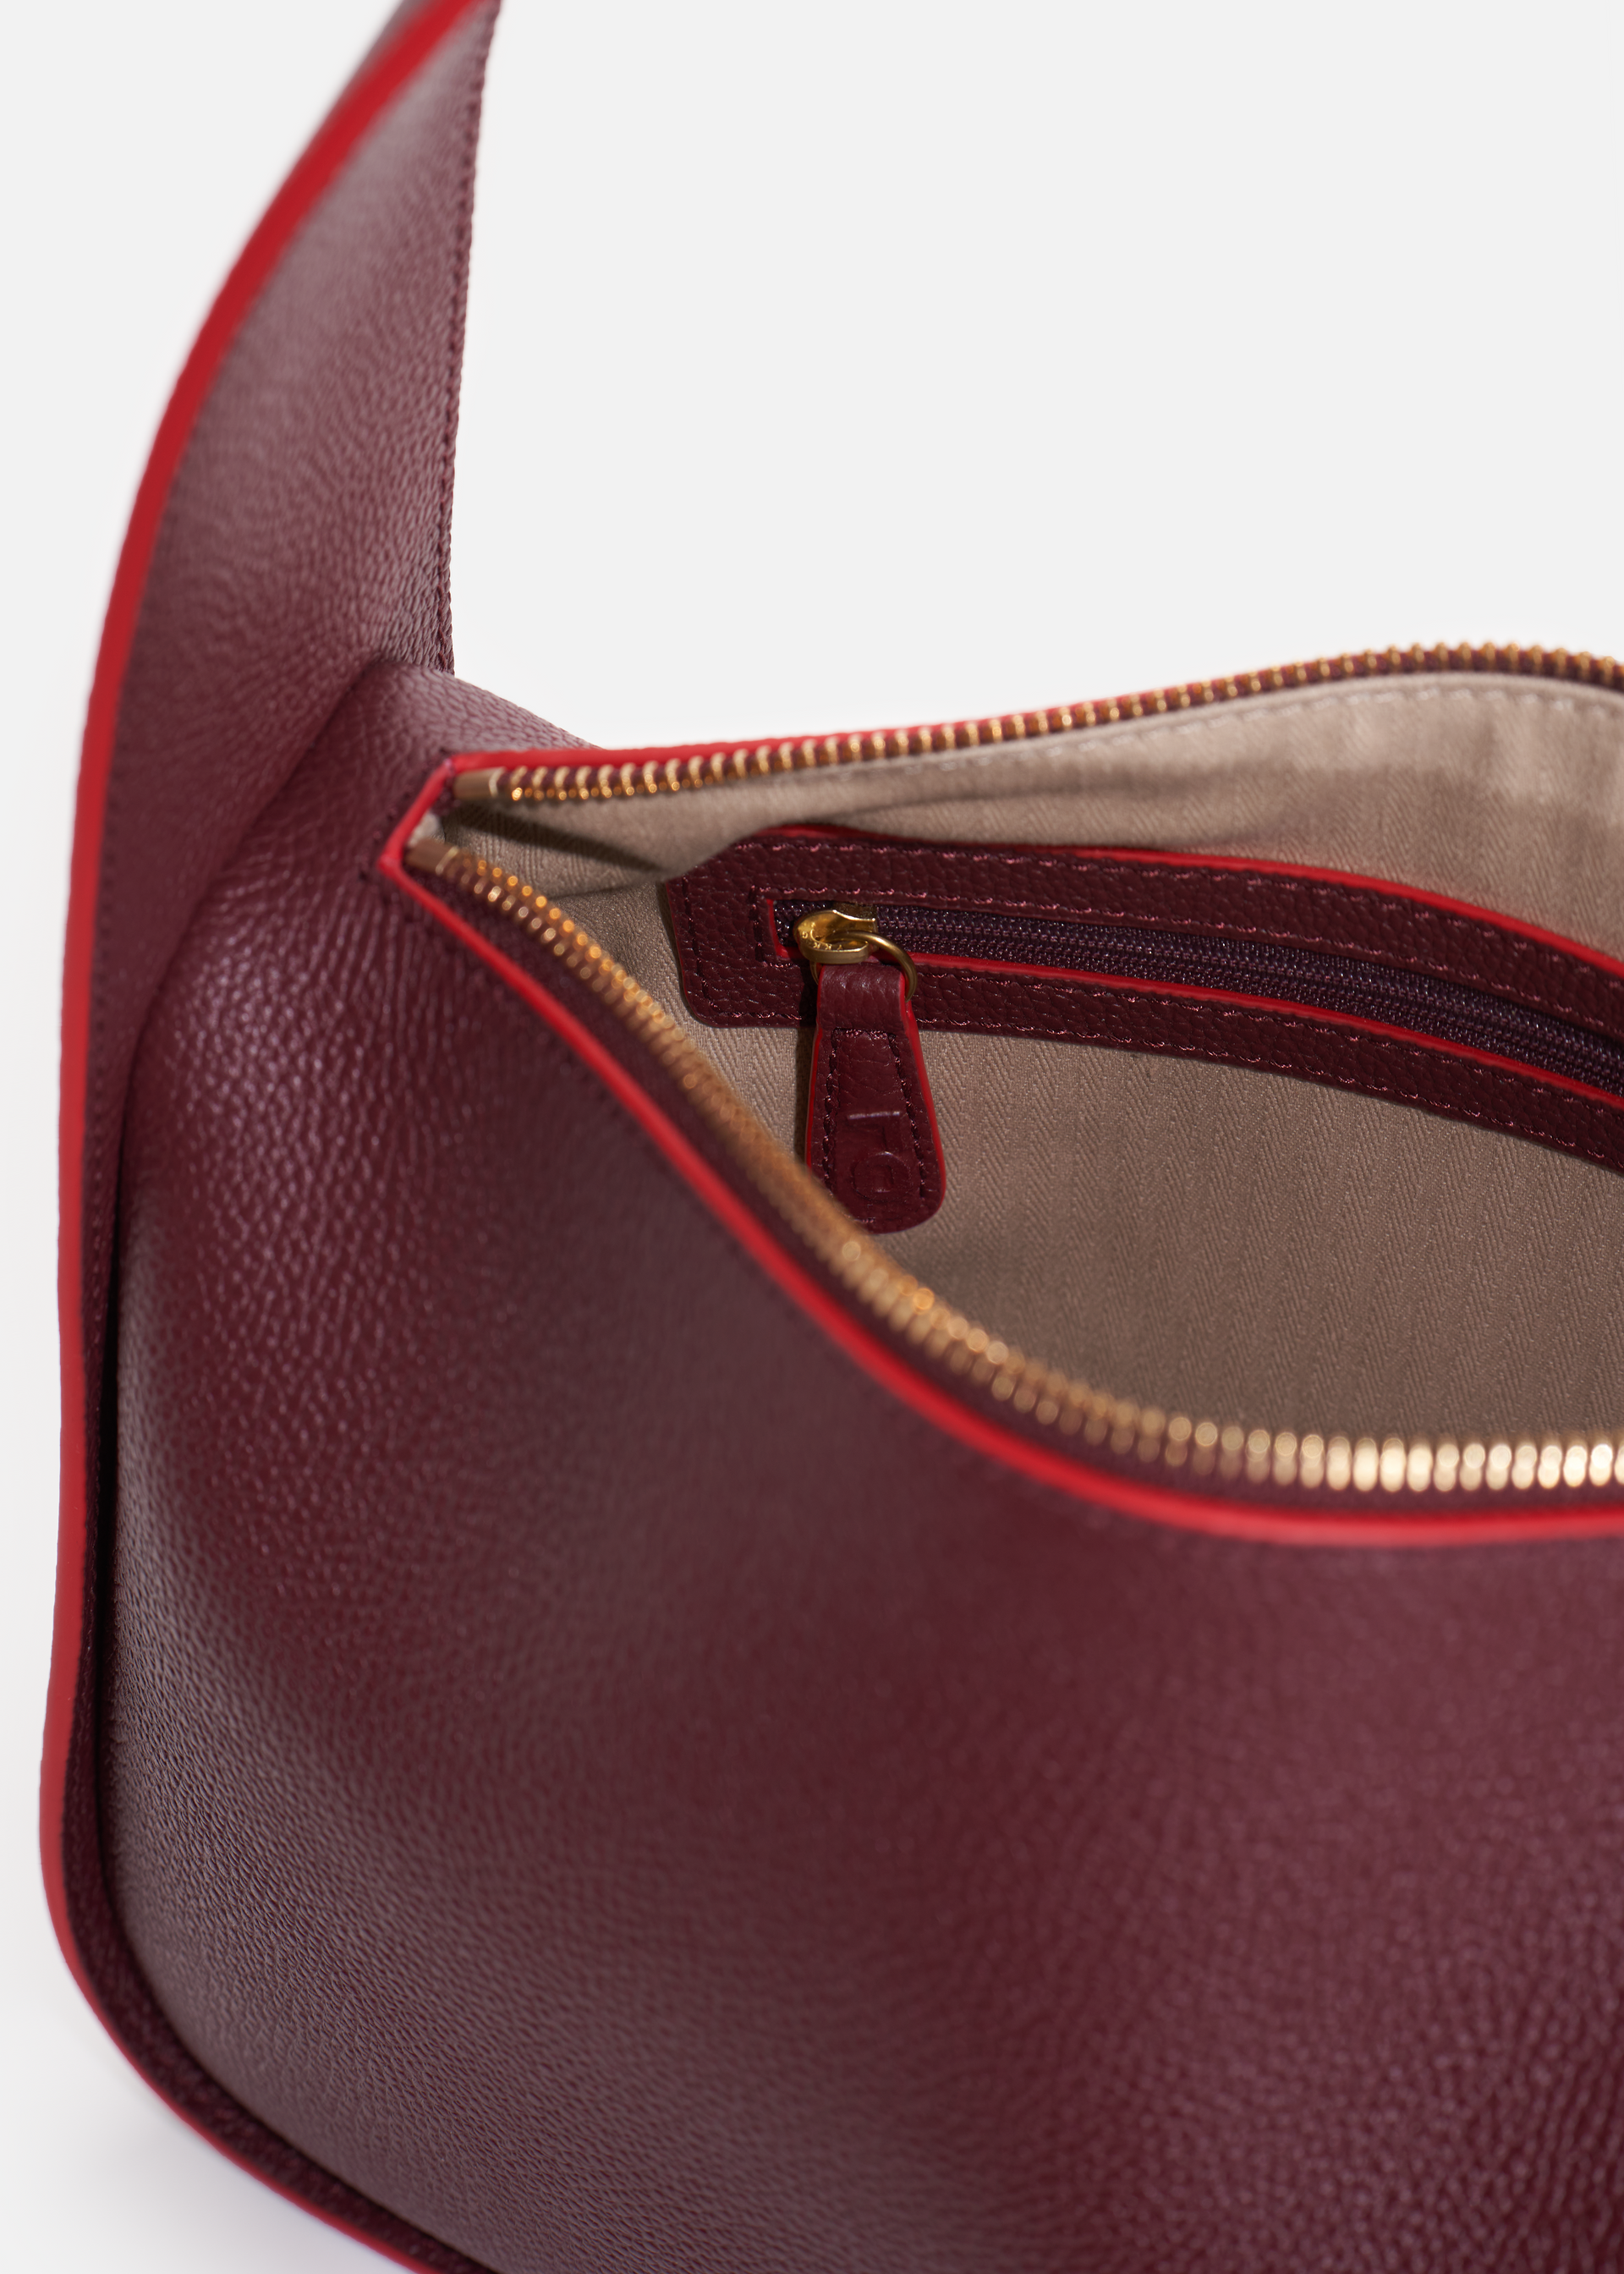 Grete pebble leather shoulder bag in carnelian with red edge paint